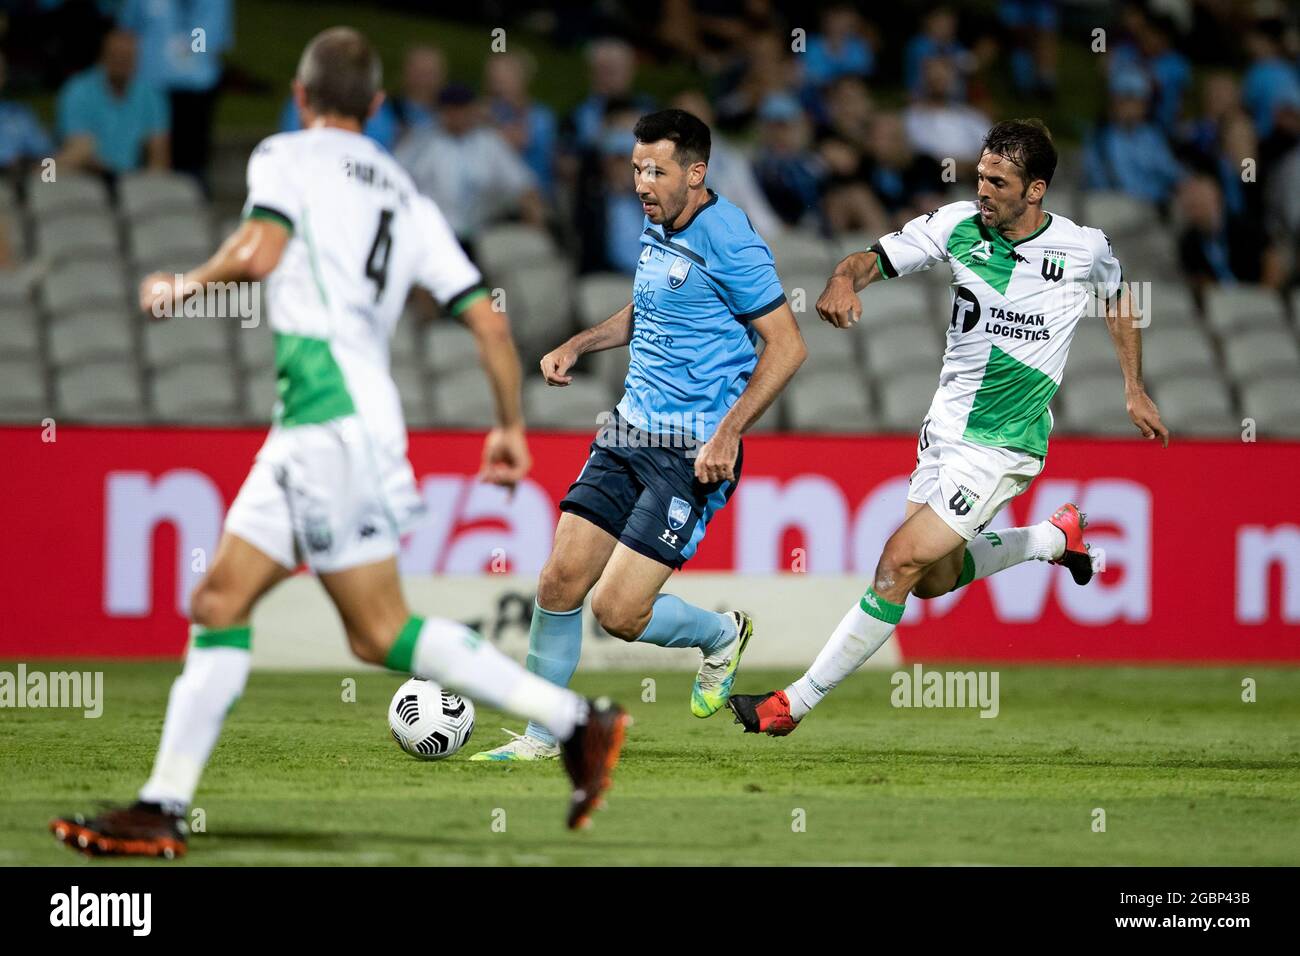 SYDNEY, AUSTRALIA - MARCH 10: Ryan Mcgowan of Sydney FC dribbles the ball during the A-League soccer match between Sydney FC and Western United on March 10, 2021 at Netstrata Jubilee Stadium in Sydney, Australia. (Photo by Speed Media/Icon Sportswire)Credit: Pete Dovgan/Speed Media/Alamy Live News Stock Photo